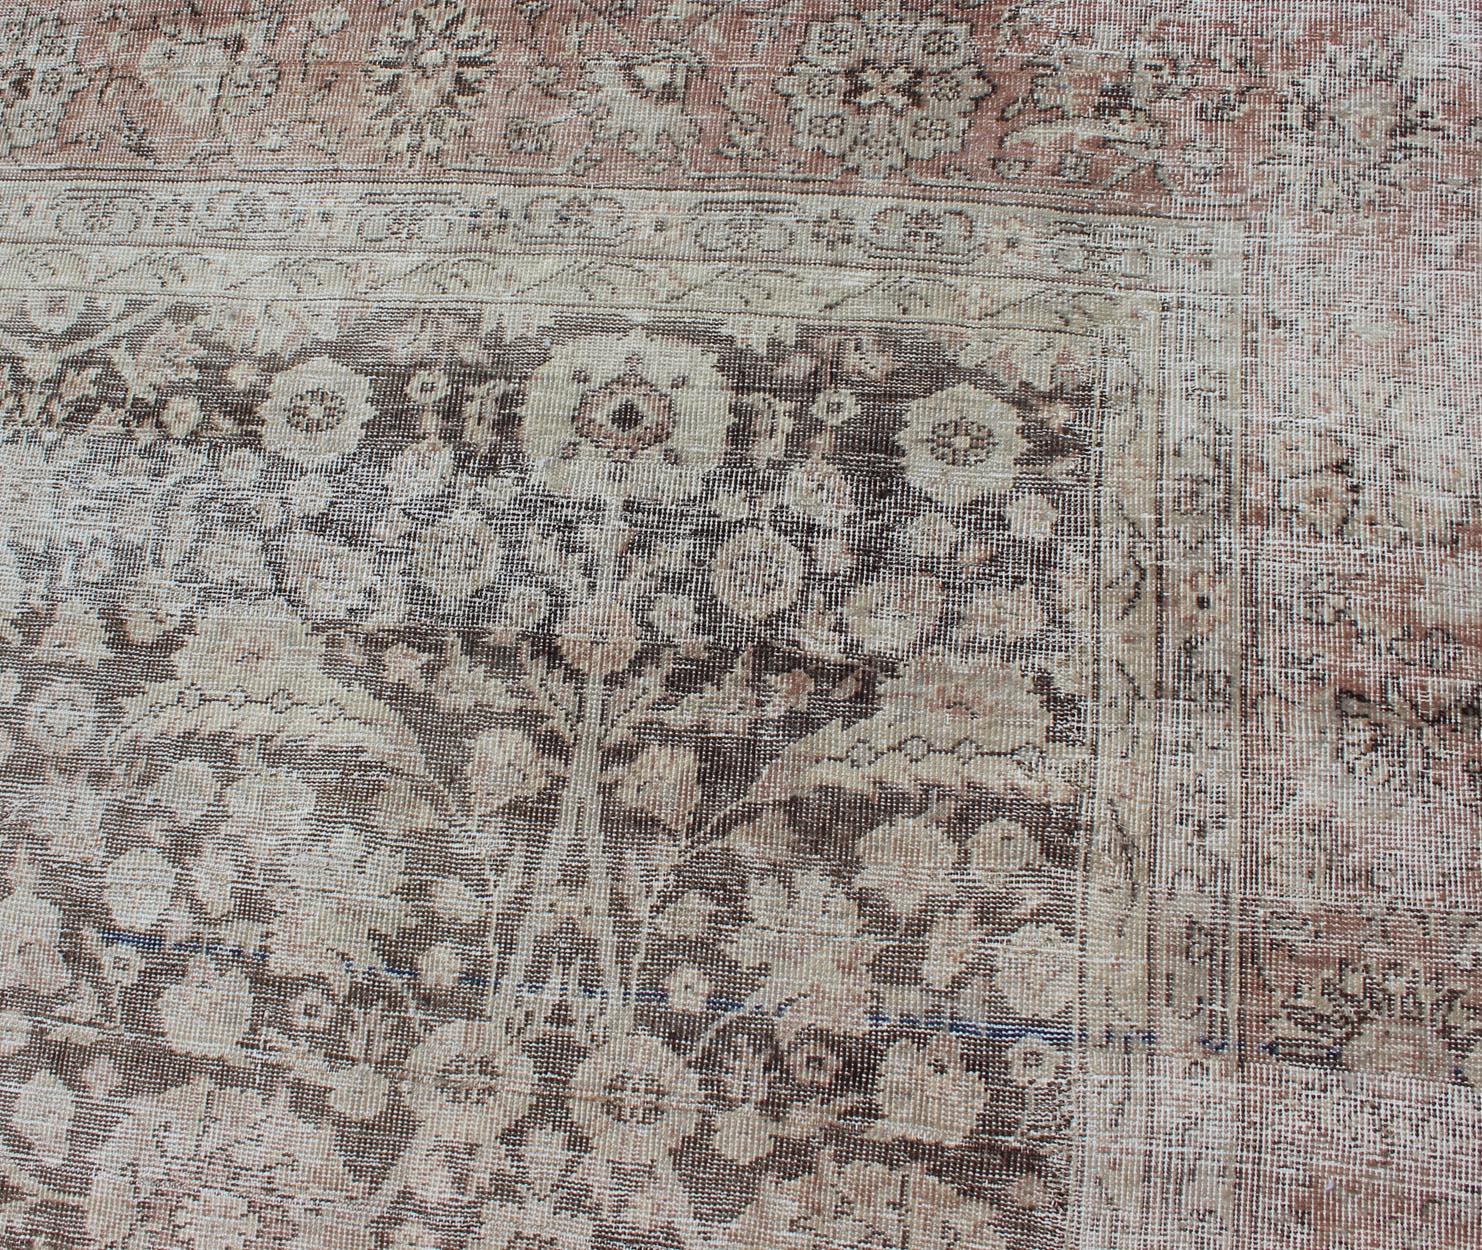 Antique Turkish Oushak Rug with All-Over Floral Design in Earth Tones For Sale 5